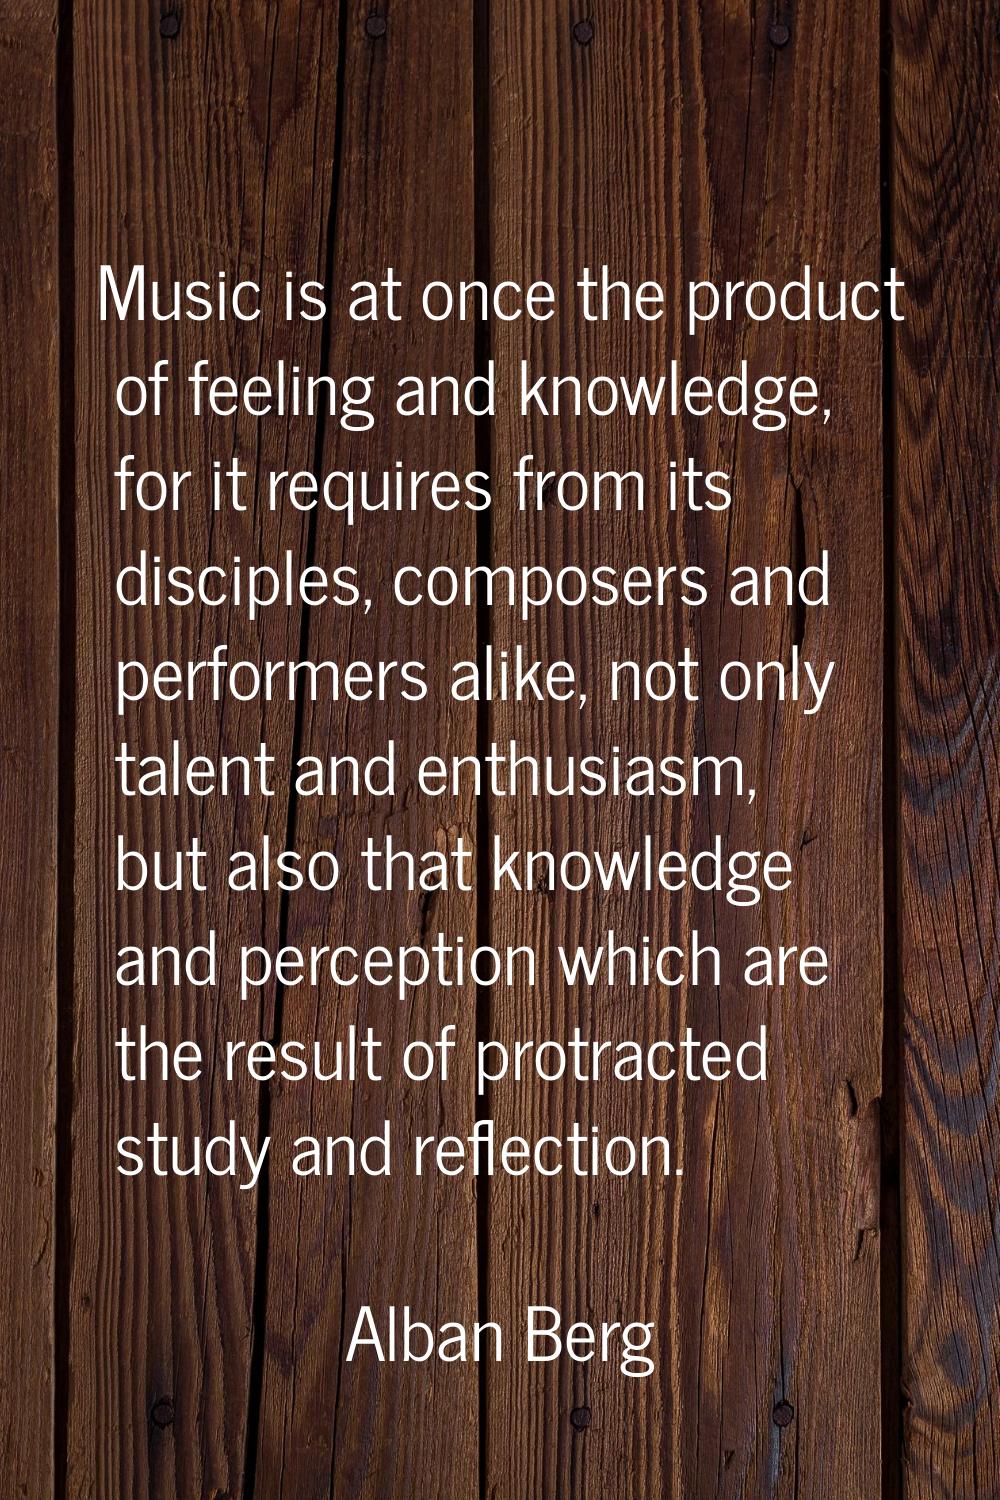 Music is at once the product of feeling and knowledge, for it requires from its disciples, composer